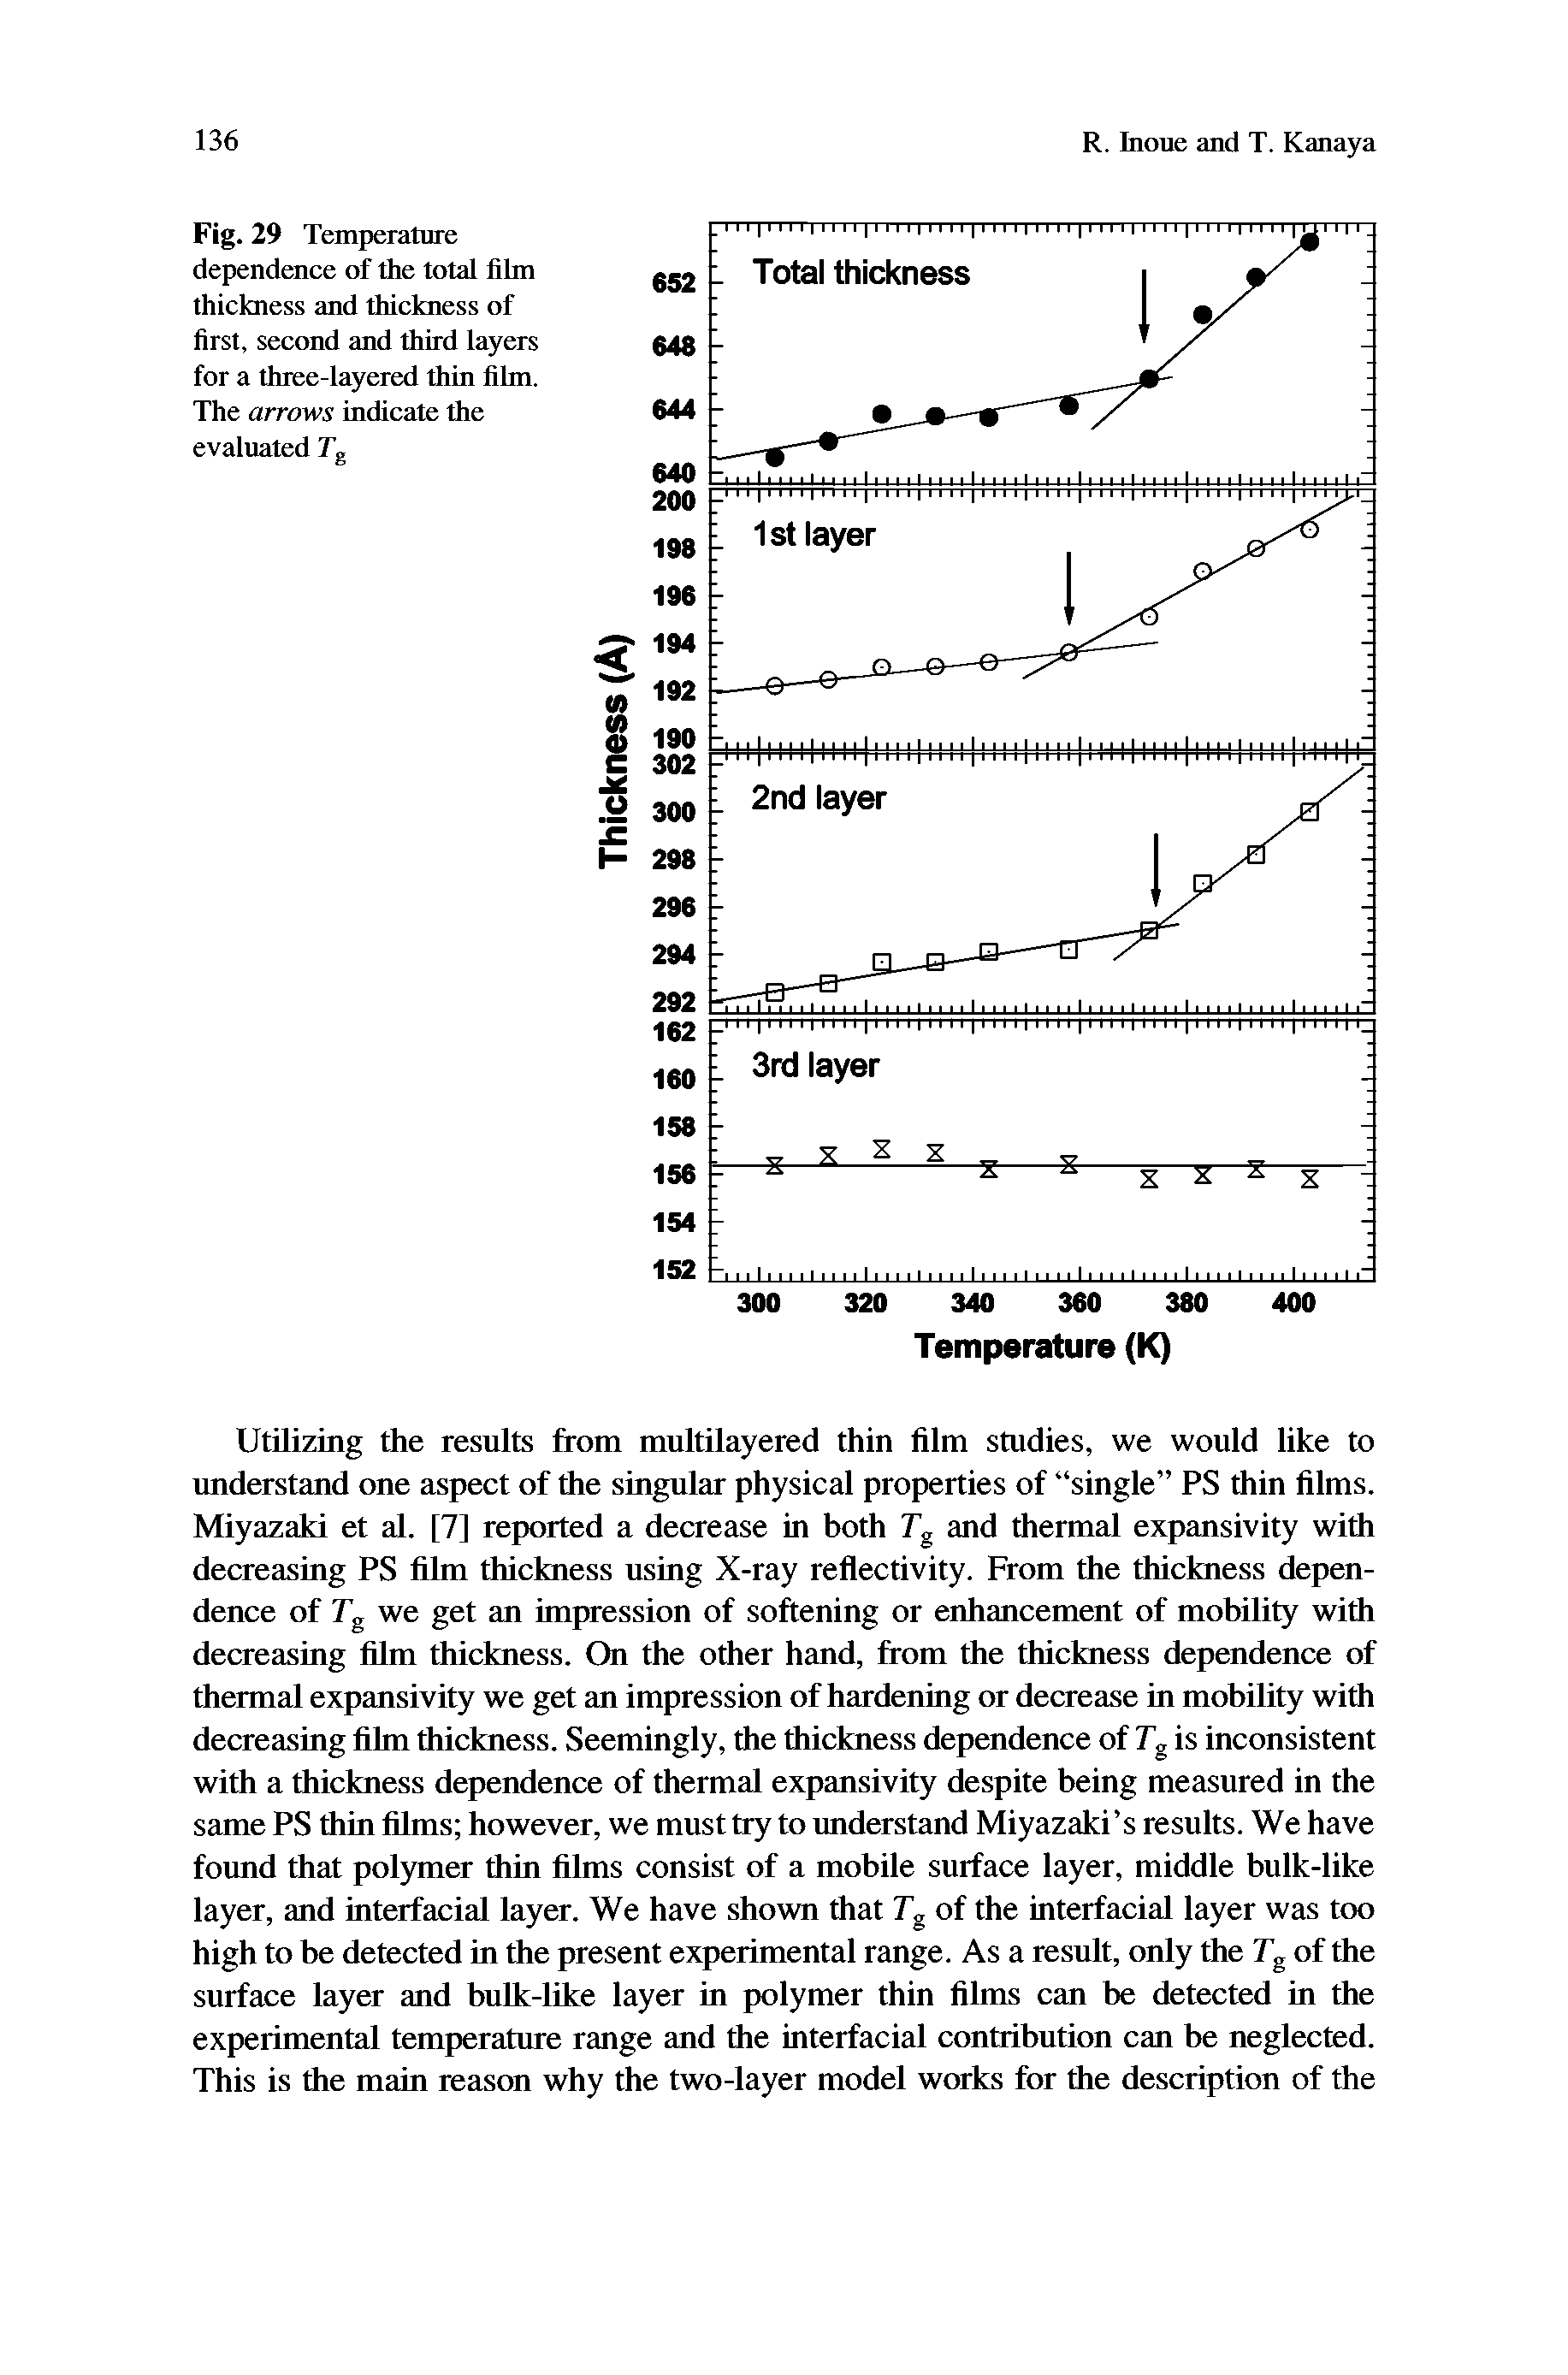 Fig. 29 Temperature dependence of the total film thickness and thickness of first, second and third layers for a three-layered thin film. The arrows indicate the evaluated T ...